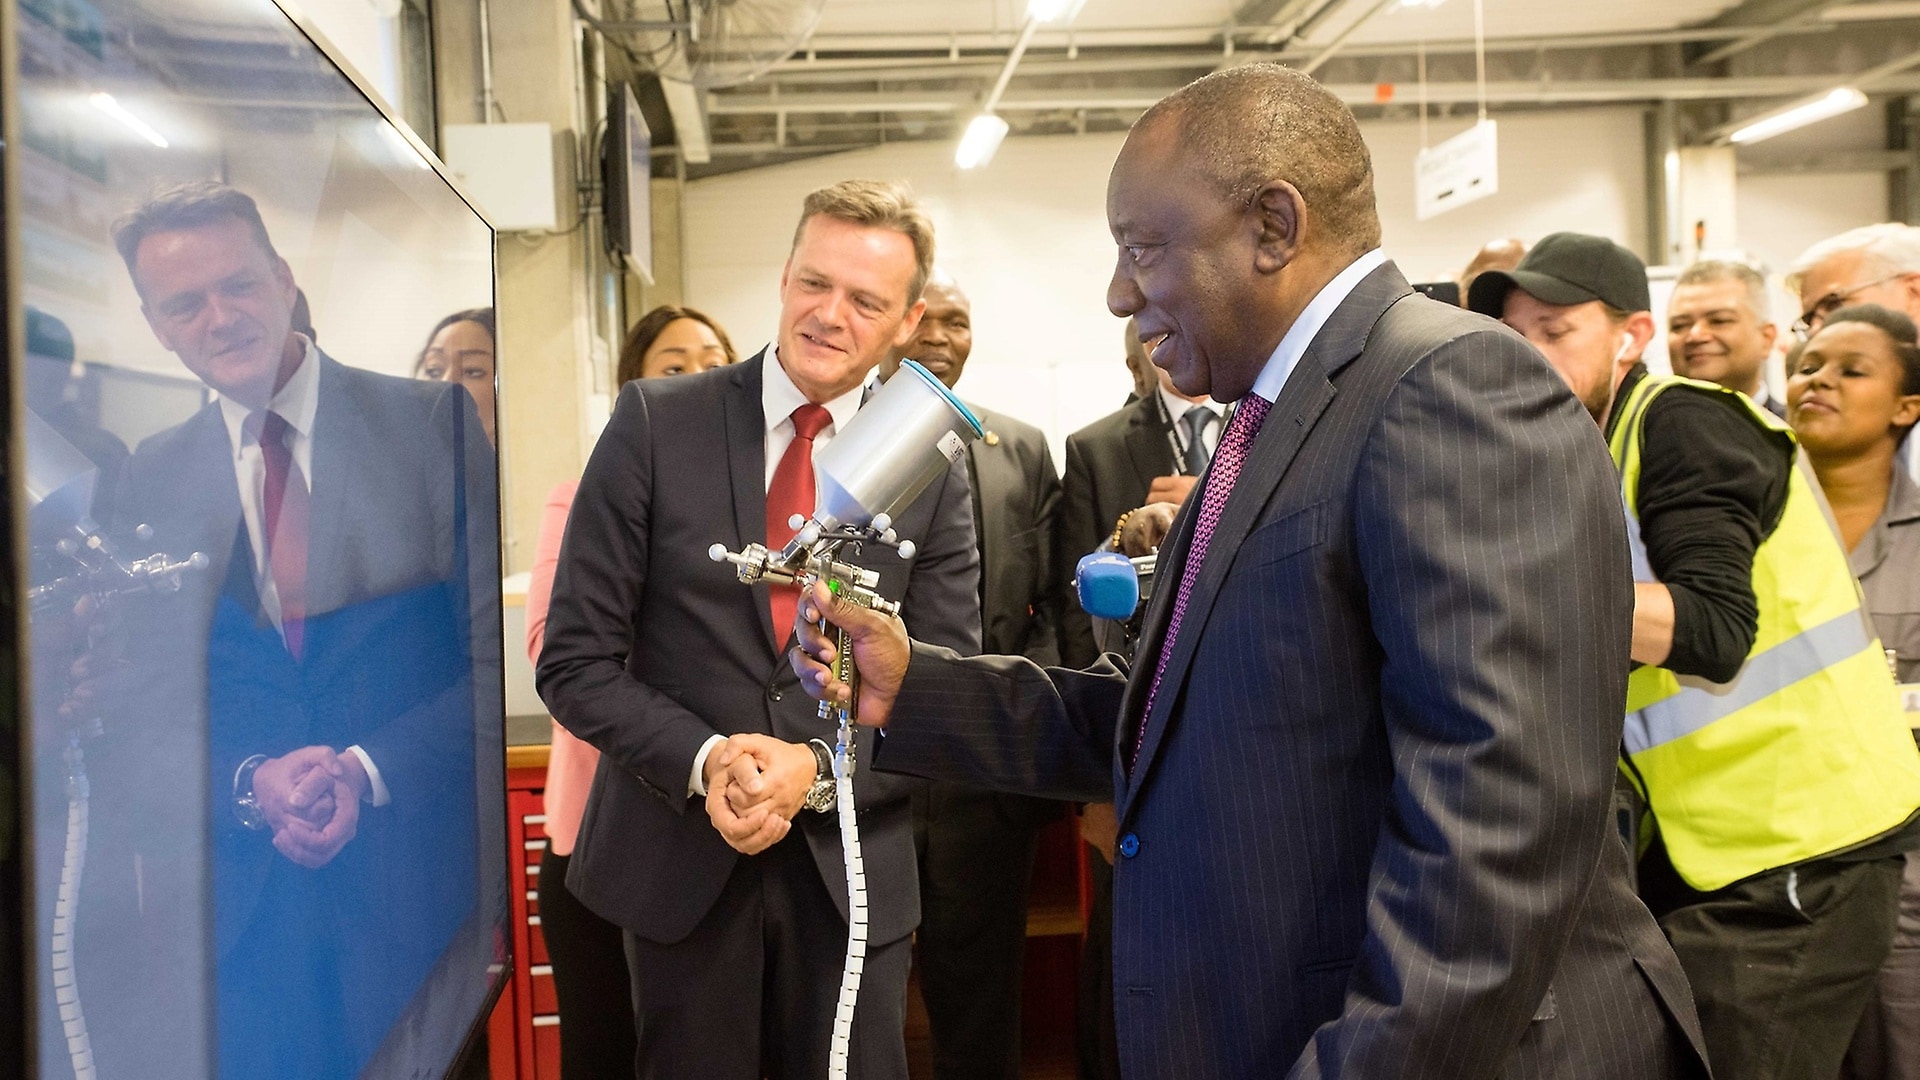 Markus Schäfer shows Cyril Ramaphosa the virtual painting training station at the Mercedes-Benz Learning Academy in East London (South Africa).